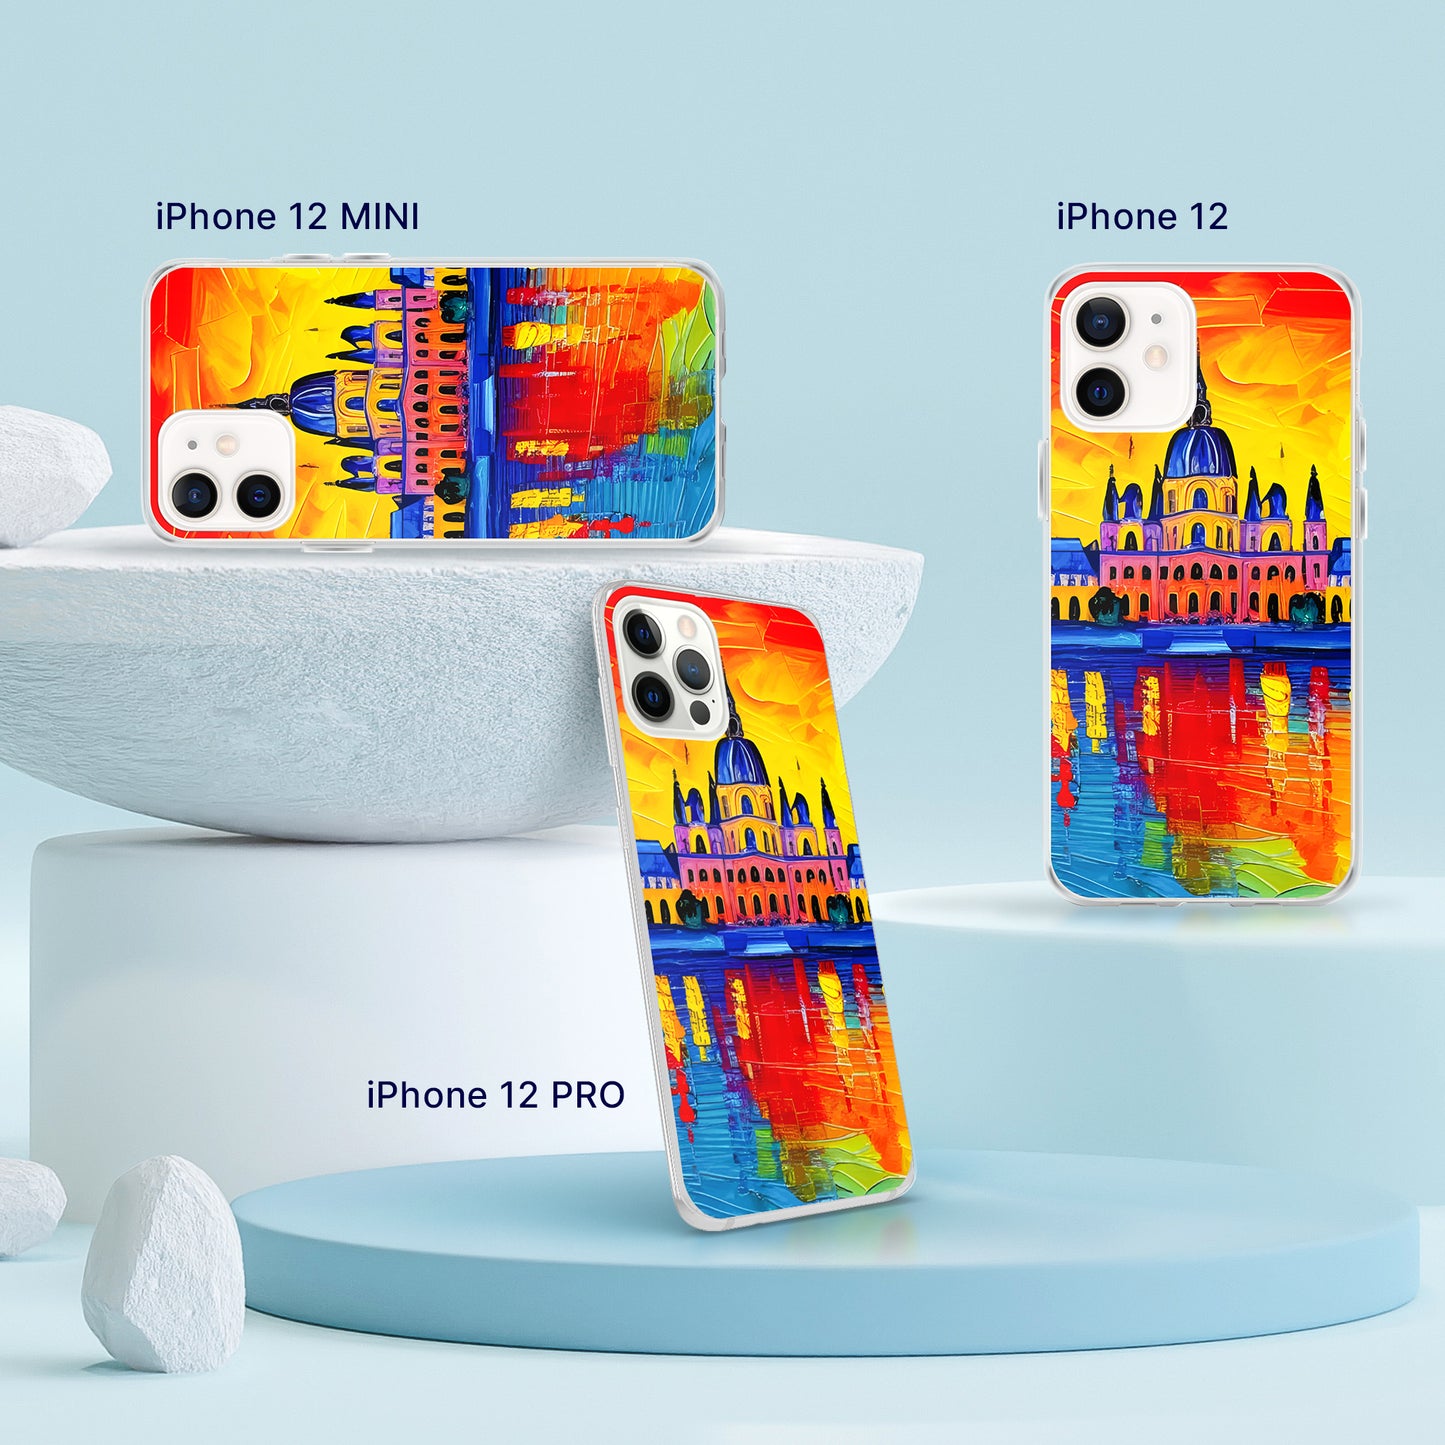 Fashionable iPhone Case with cityscape painting - Wien, Schonbrunn Palace | Seepu | 12 MINI, 12, 12 PRO